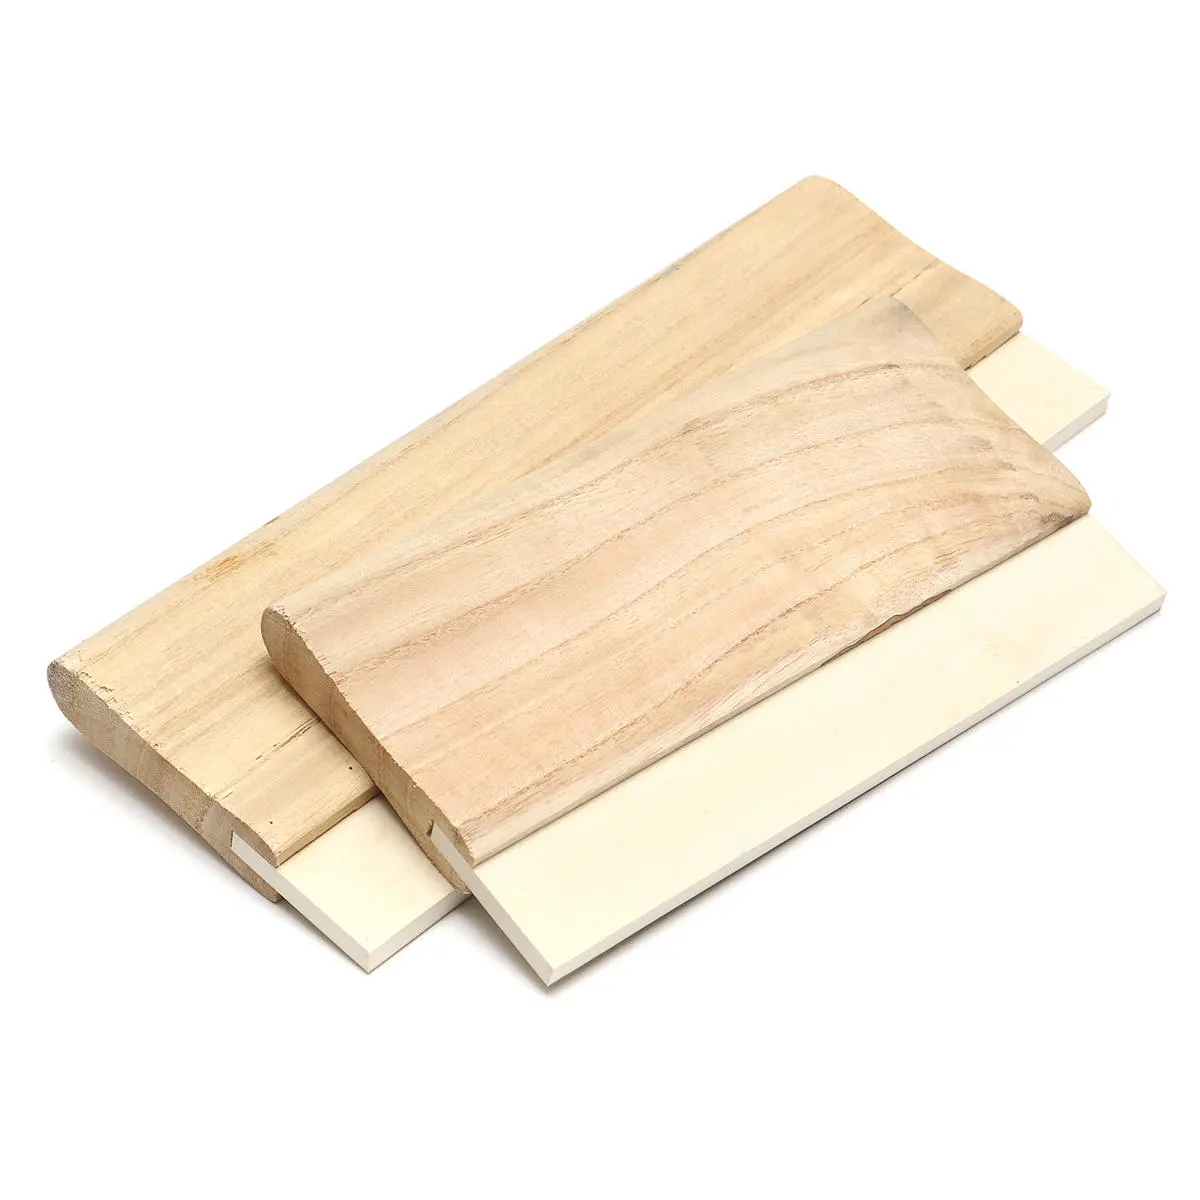 2 Sizes A4 A3 Wooden Handle Rubber Blade for Screen Printing Squeegee